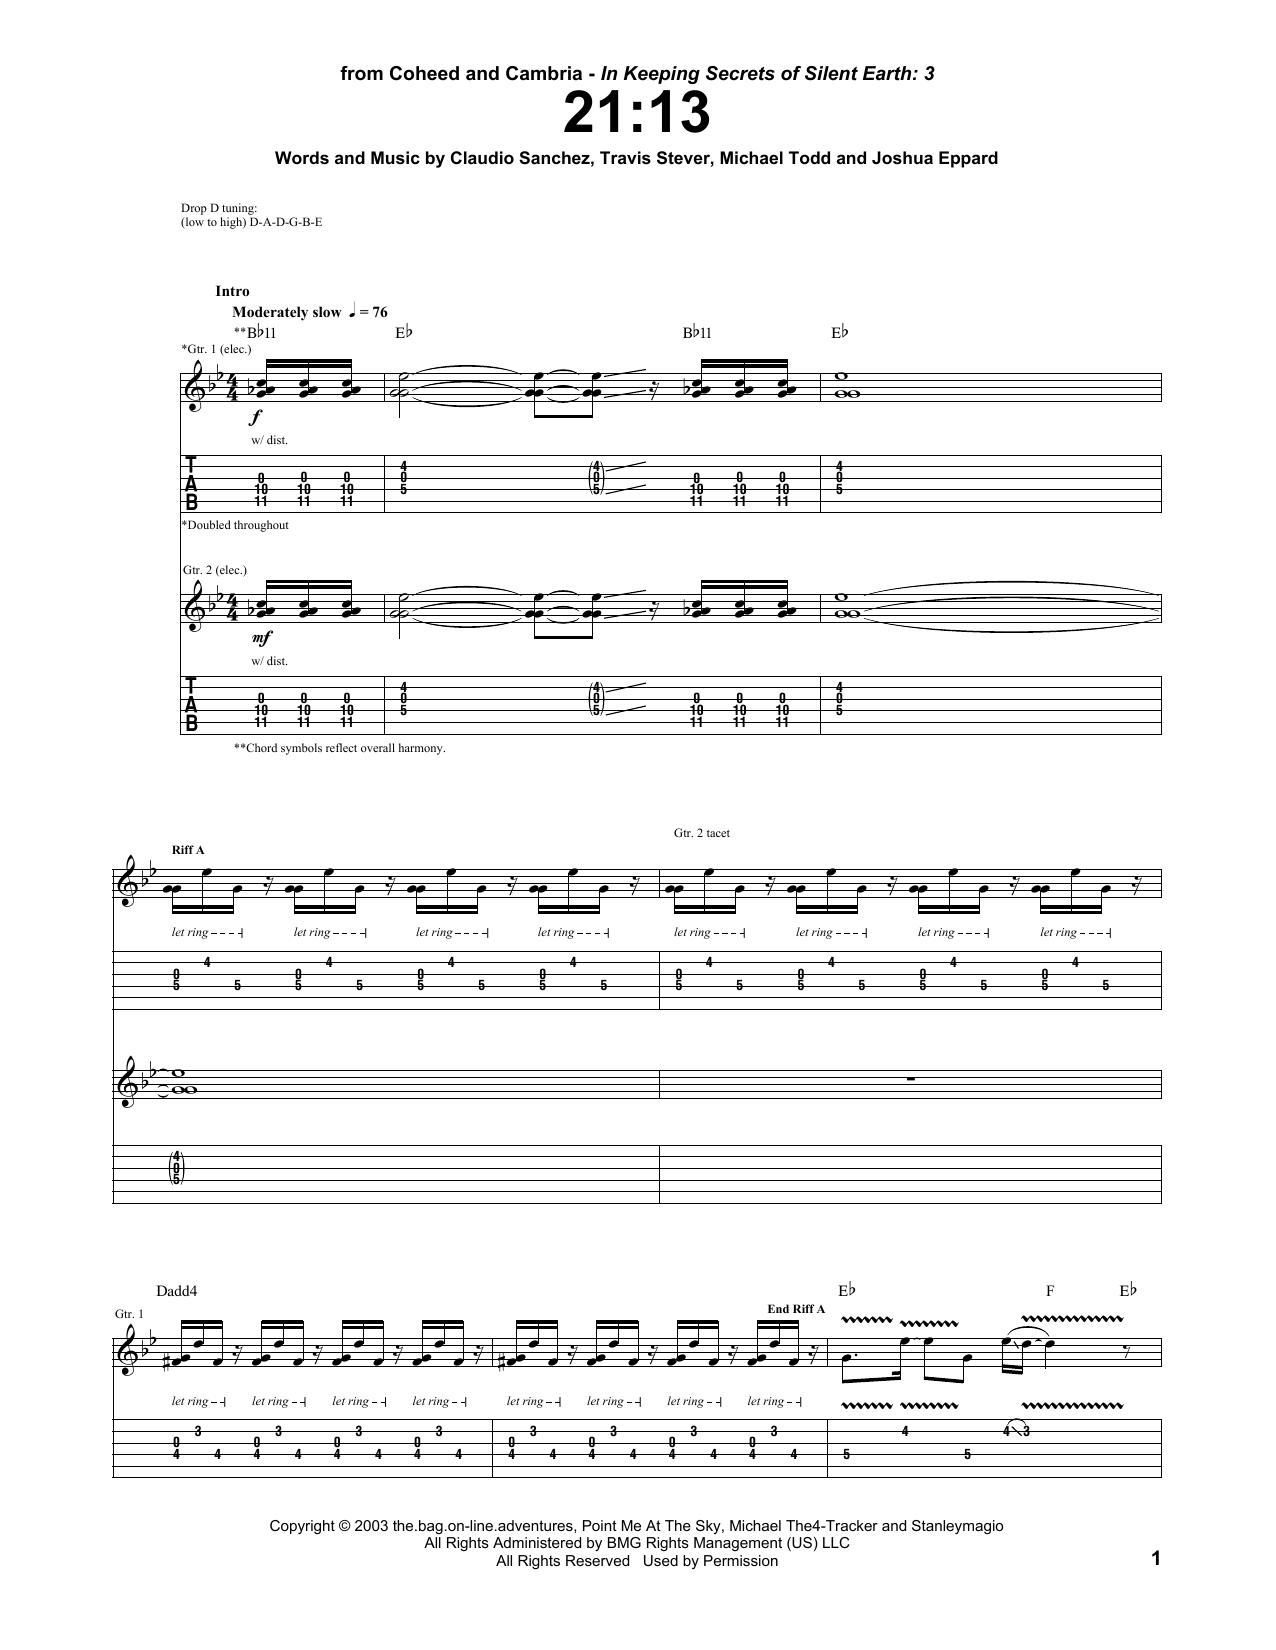 Download Coheed And Cambria 21:13 Sheet Music